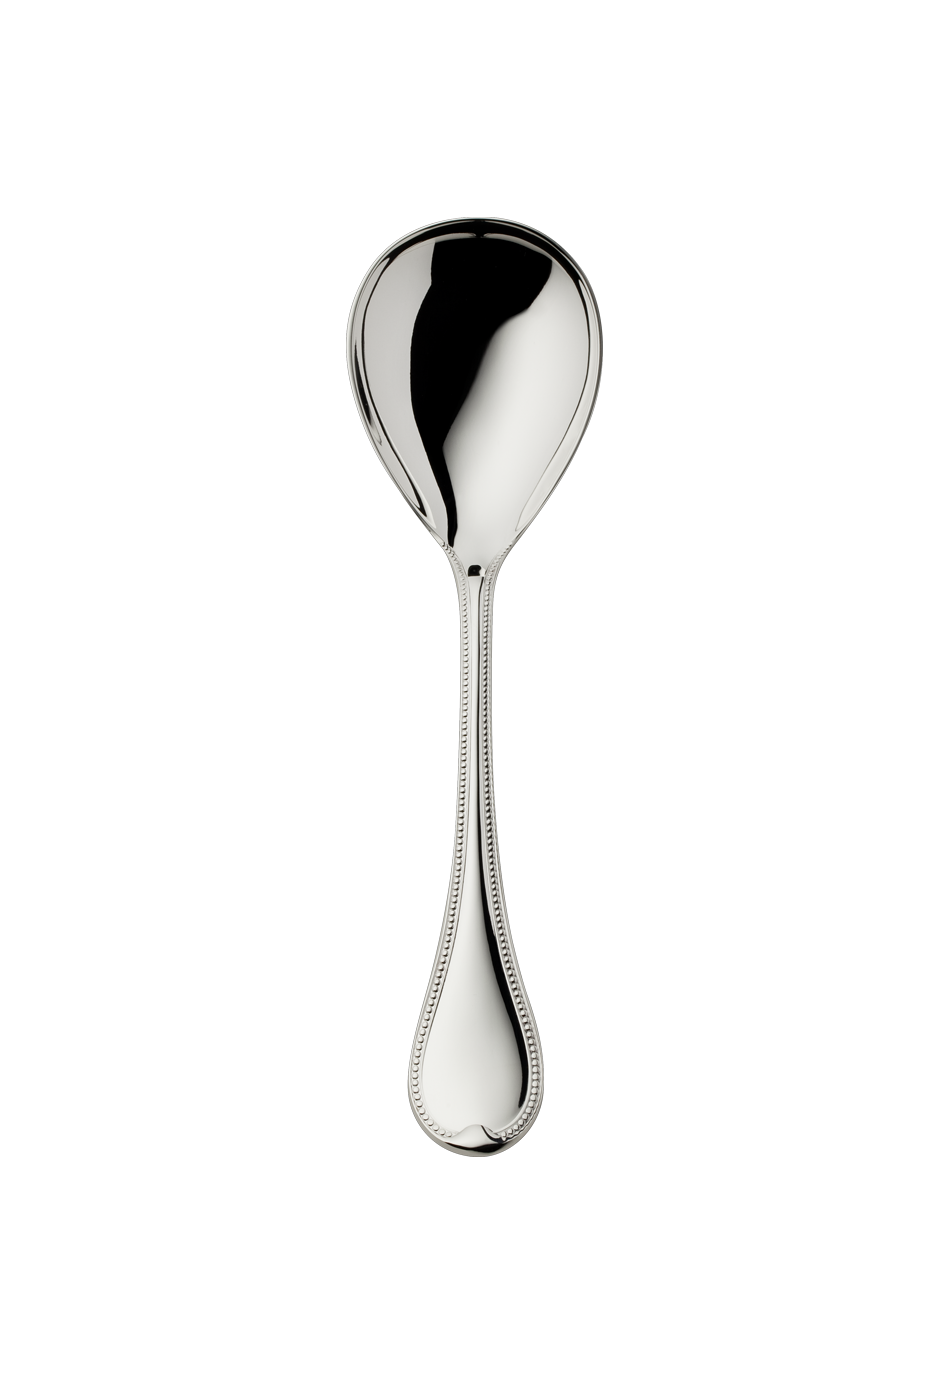 Franz. Perl Compote/Salad Serving Spoon, large (150g massive silverplated)